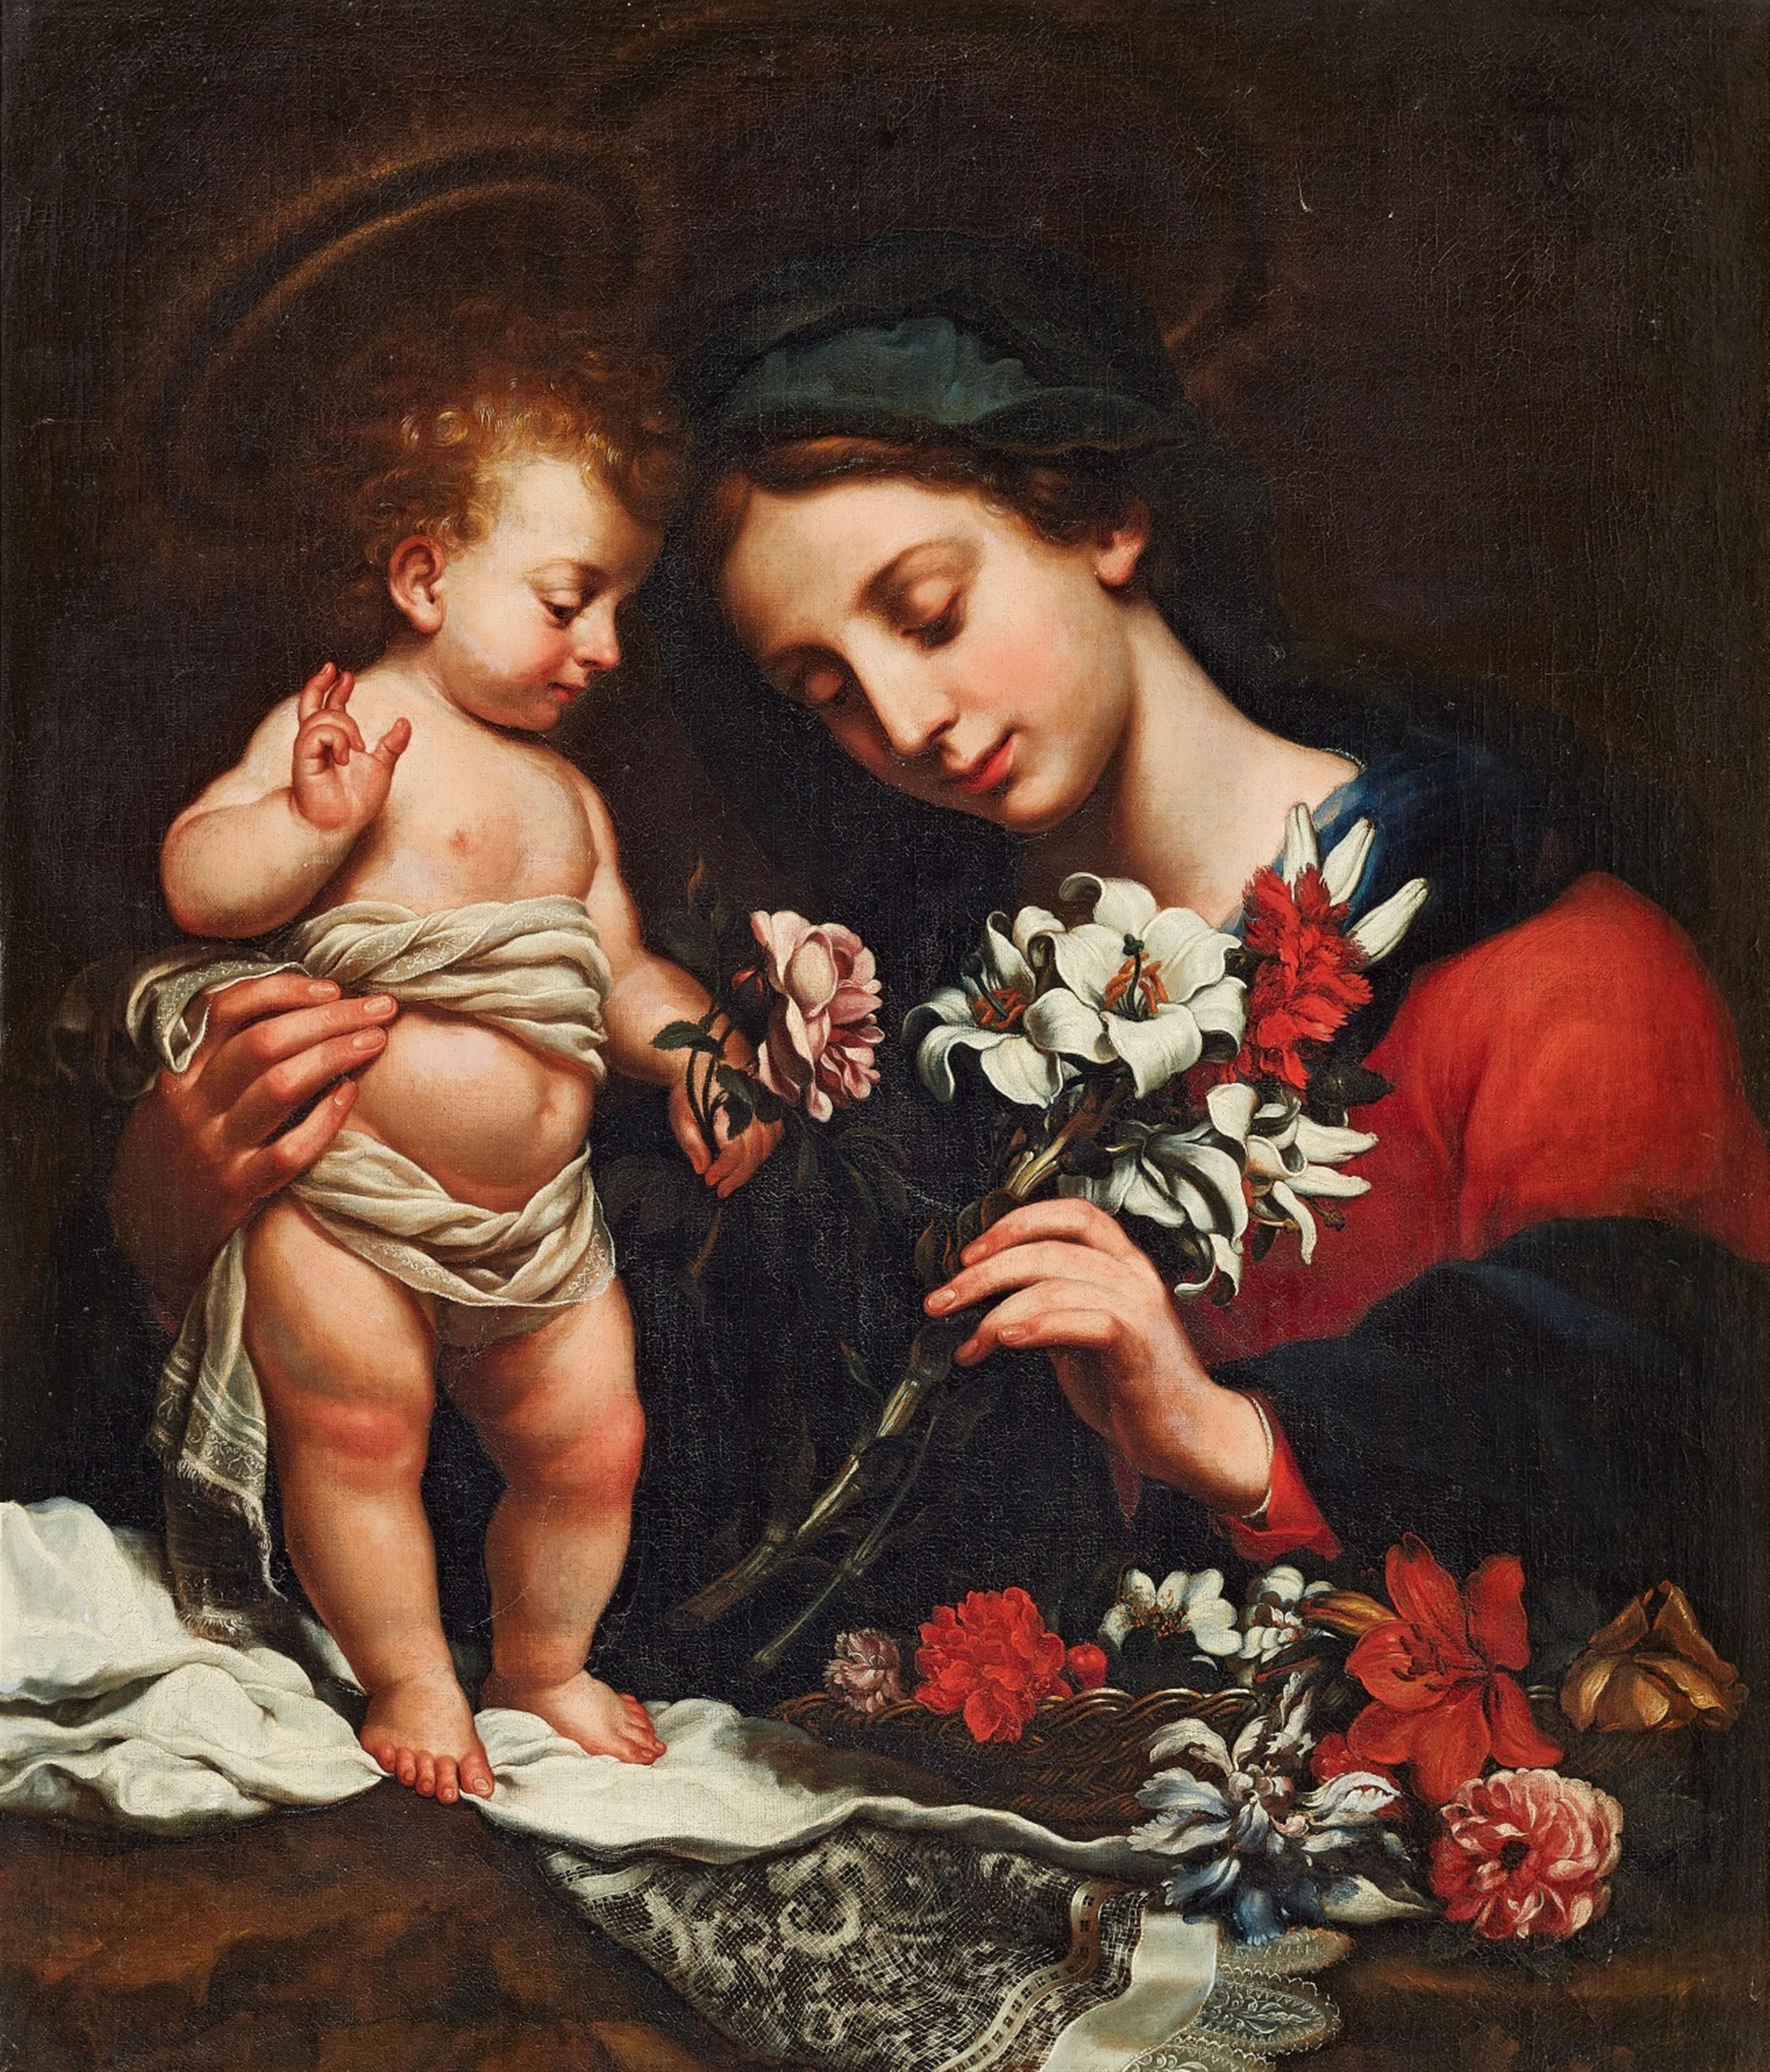 Carlo Dolci, circle of - The Virgin and Child with Flowers - image-1